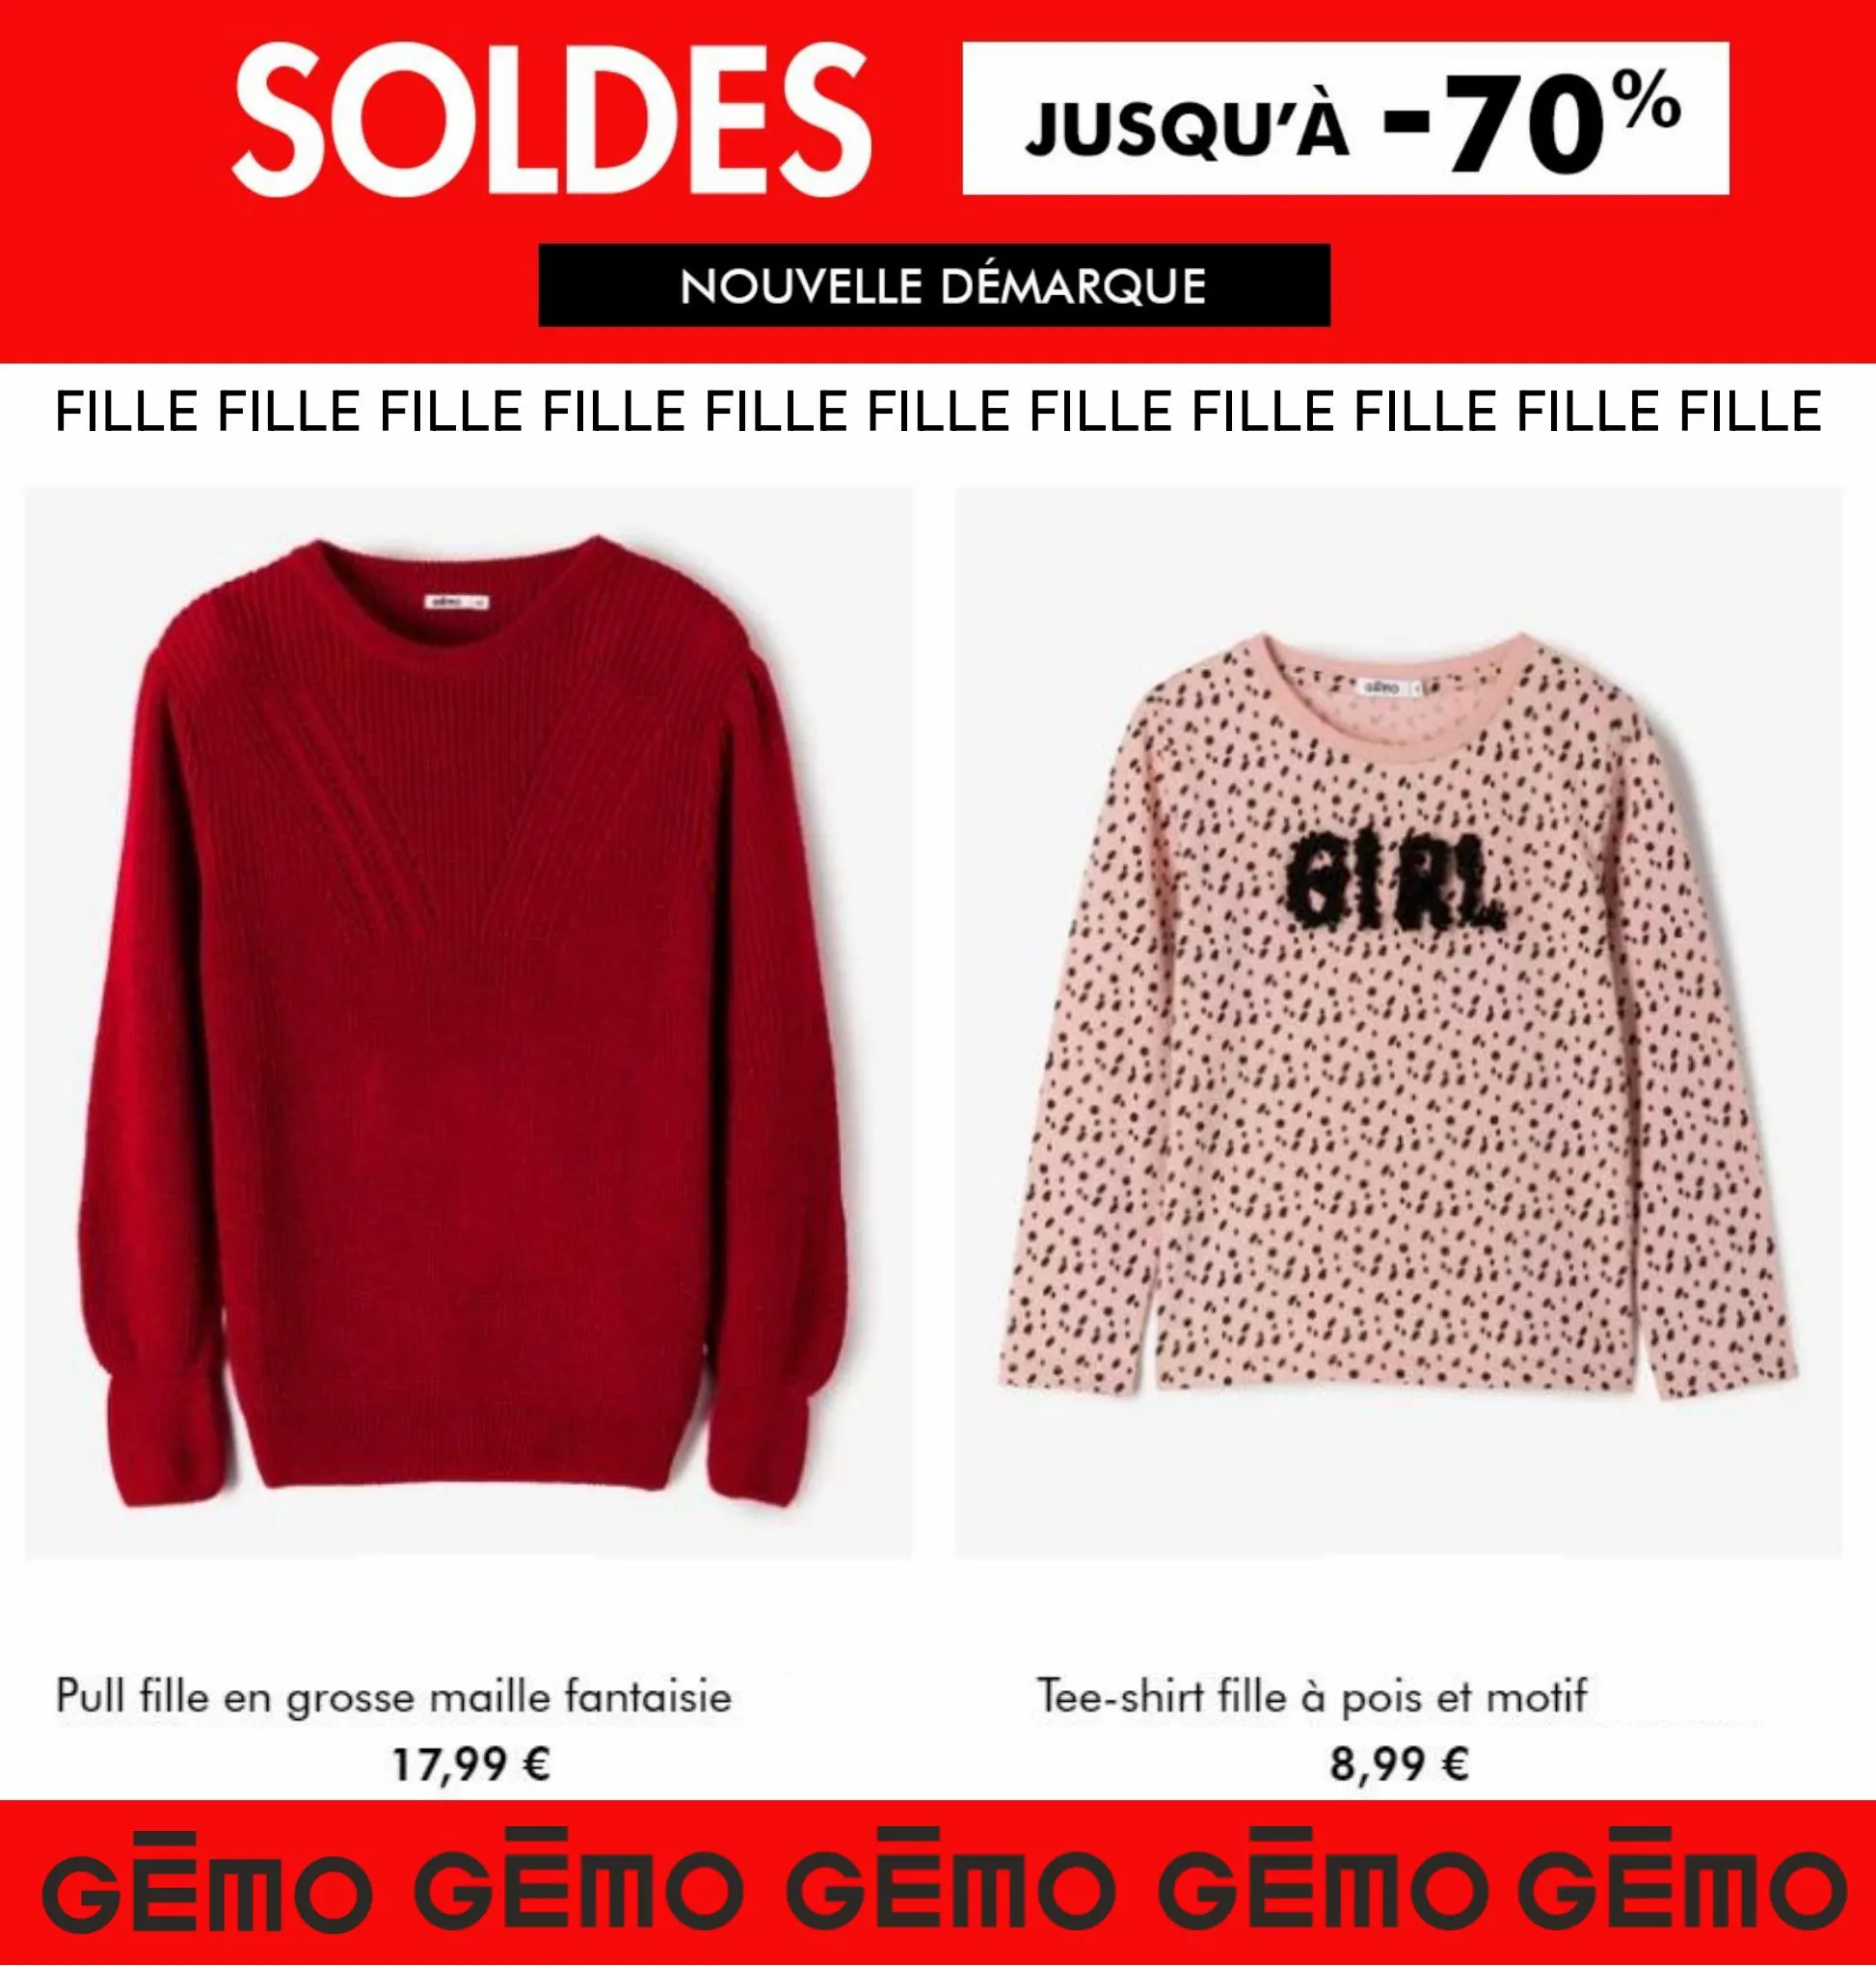 Catalogue SOLDES FILLE GEMO, page 00001